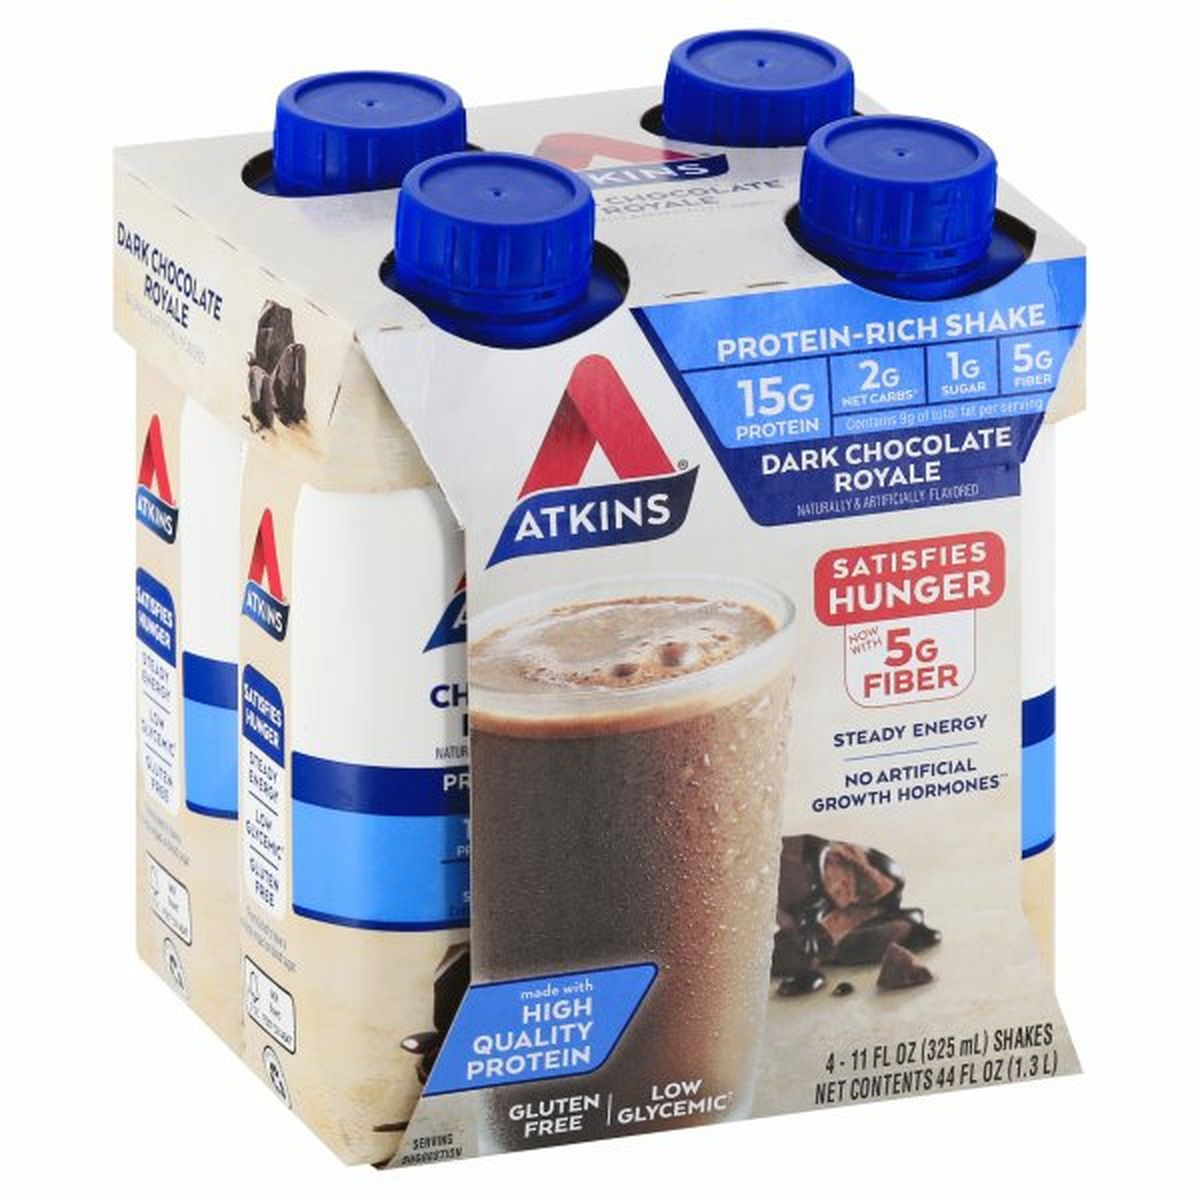 Calories in Atkins Protein-Rich Shake, Dark Chocolate Royale